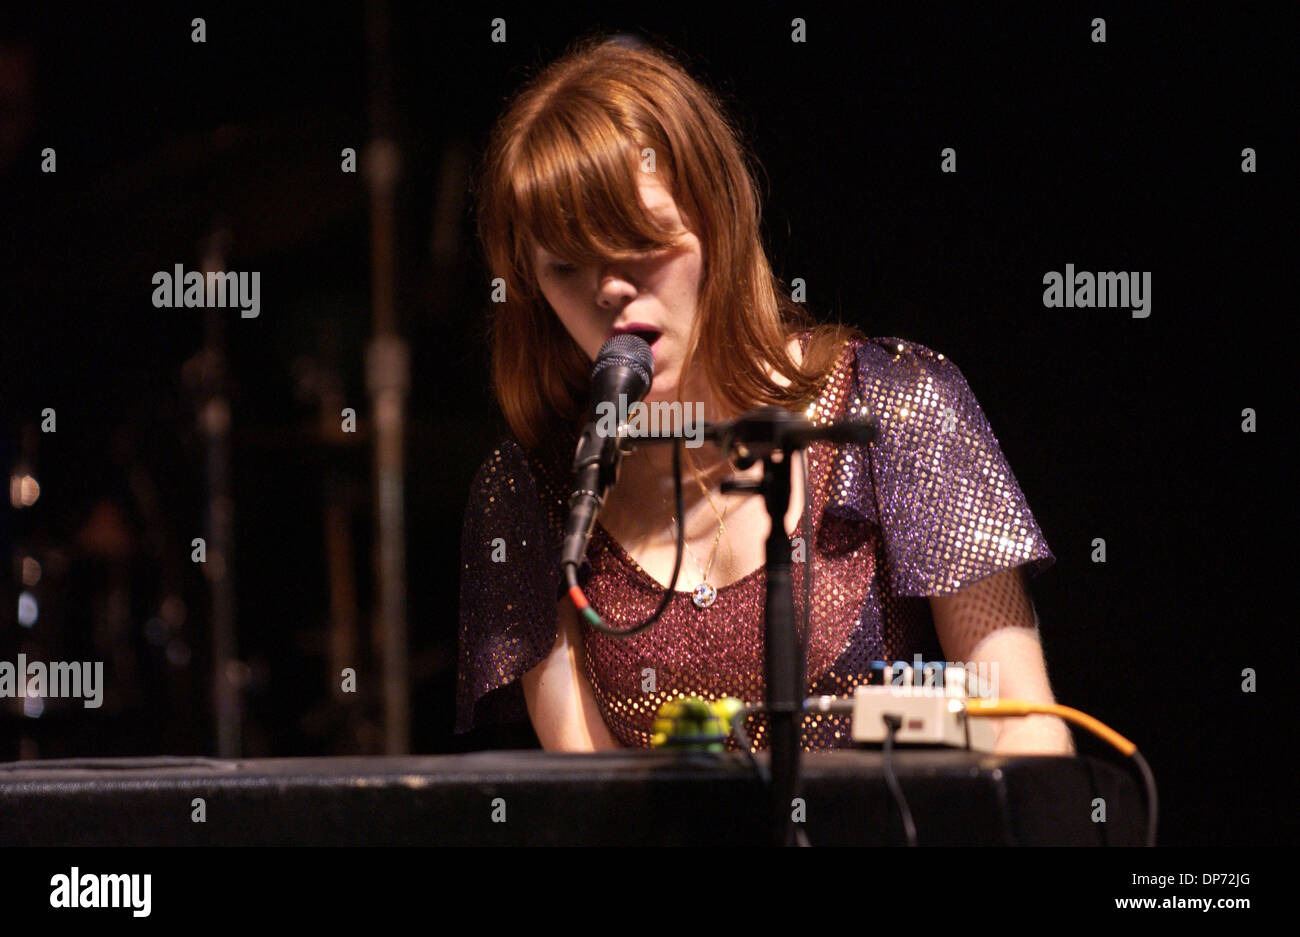 Oct 29, 2006; Las Vegas, NV, USA; Musicians JENNY LEWIS with the Watson Twins perform live at the 2nd Annual Vegoose Music Festival. The two day event takes place at Sam Boyd Stadium. Mandatory Credit: Photo by Jason Moore/ZUMA Press. (©) Copyright 2006 by Jason Moore Stock Photo